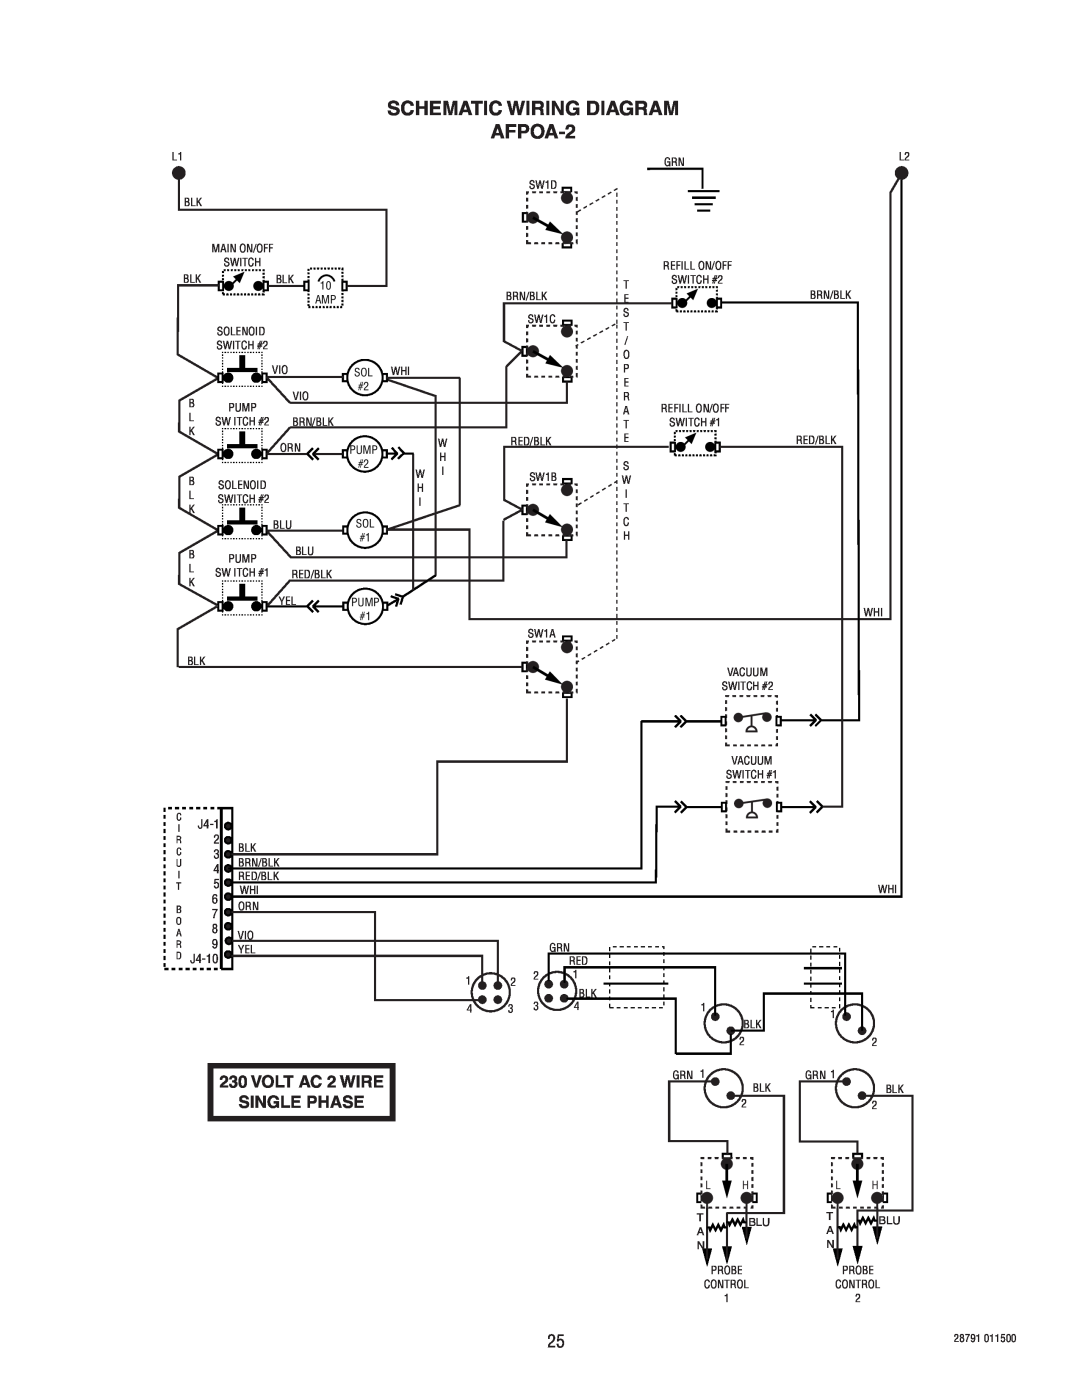 Bunn AFPO-2 SL, AFPO-3 service manual SCHEMATIC WIRING DIAGRAM AFPOA-2, VOLT AC 2 WIRE SINGLE PHASE 